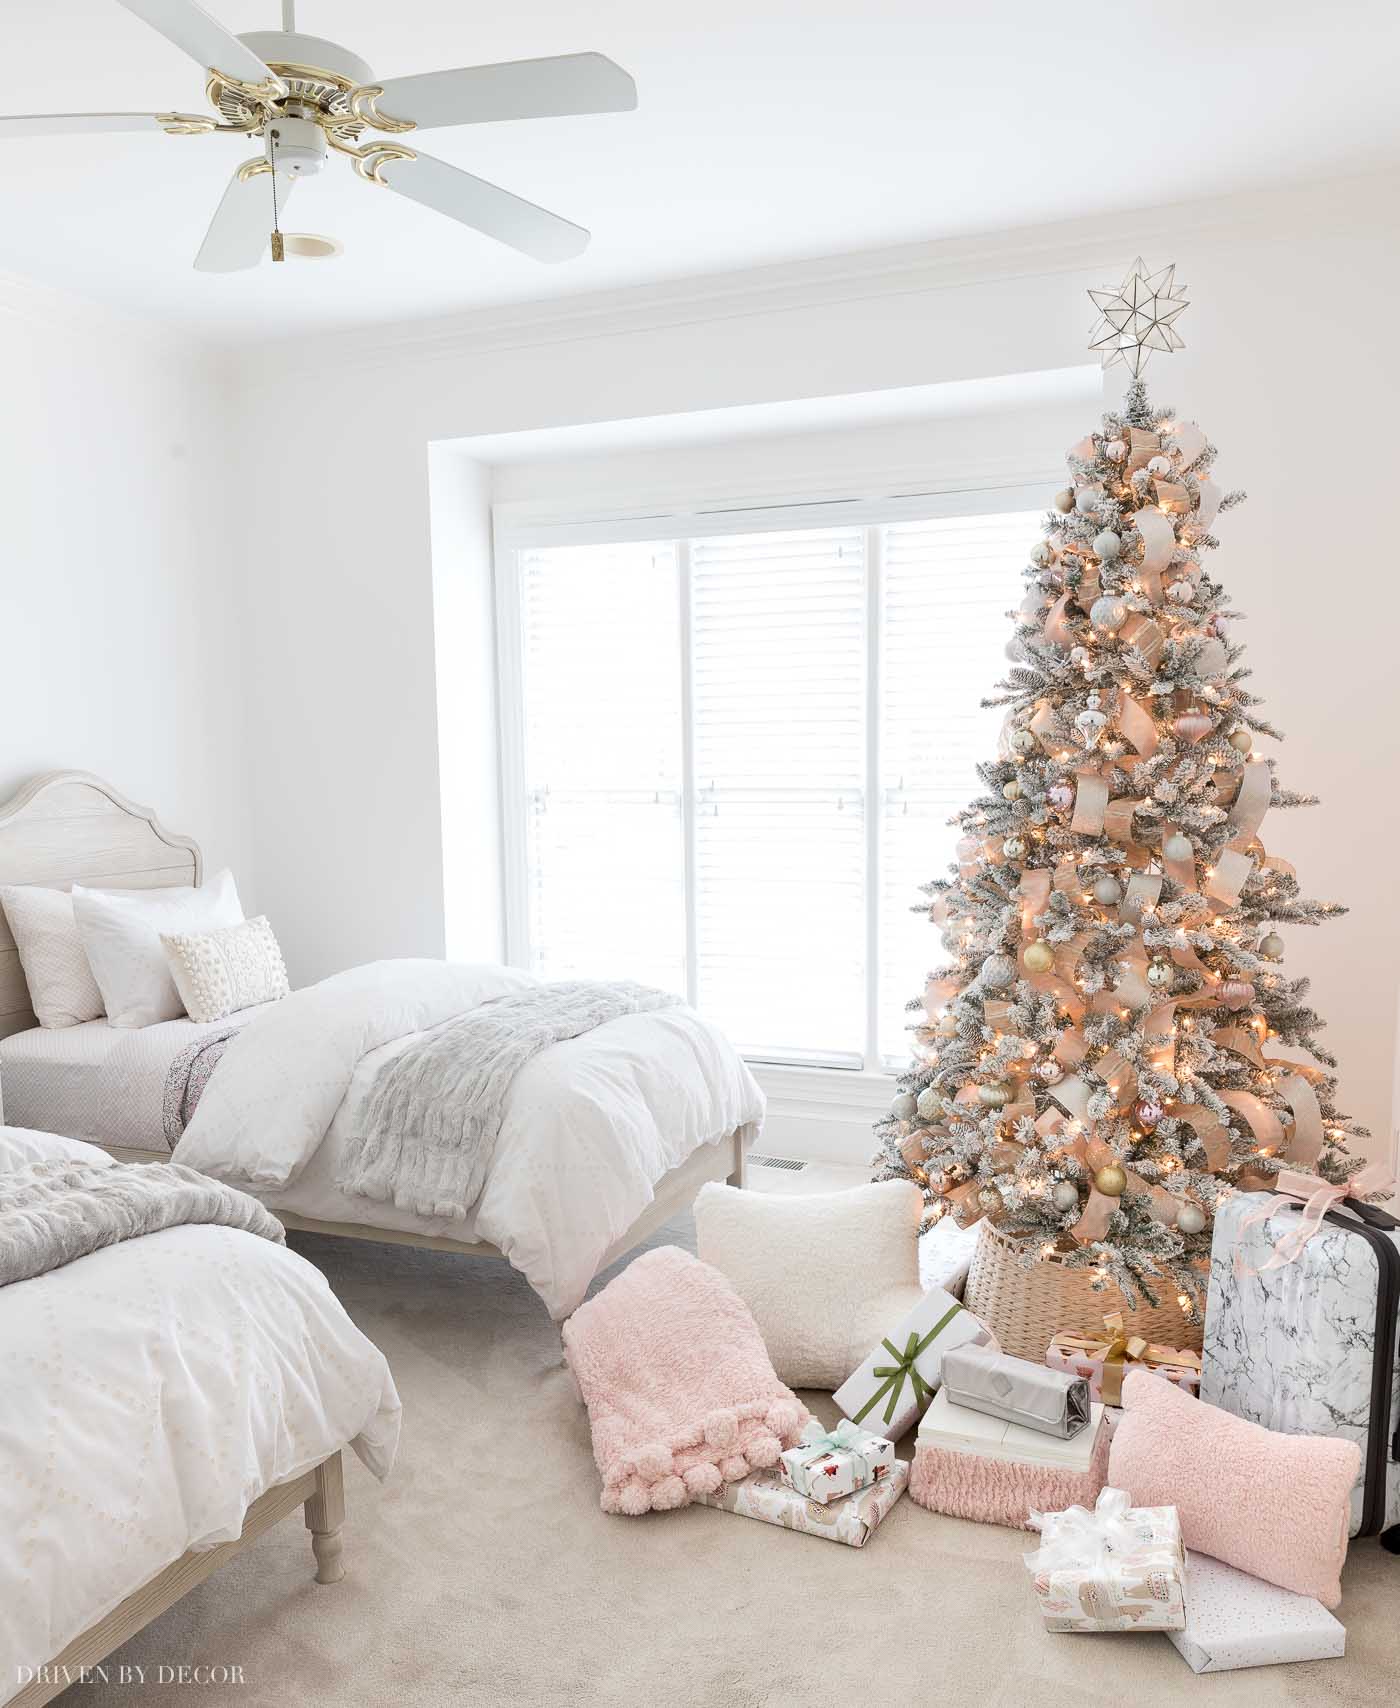 Christmas Gift Ideas for Teen Girls: Six No-Fail Presents! - Driven by Decor